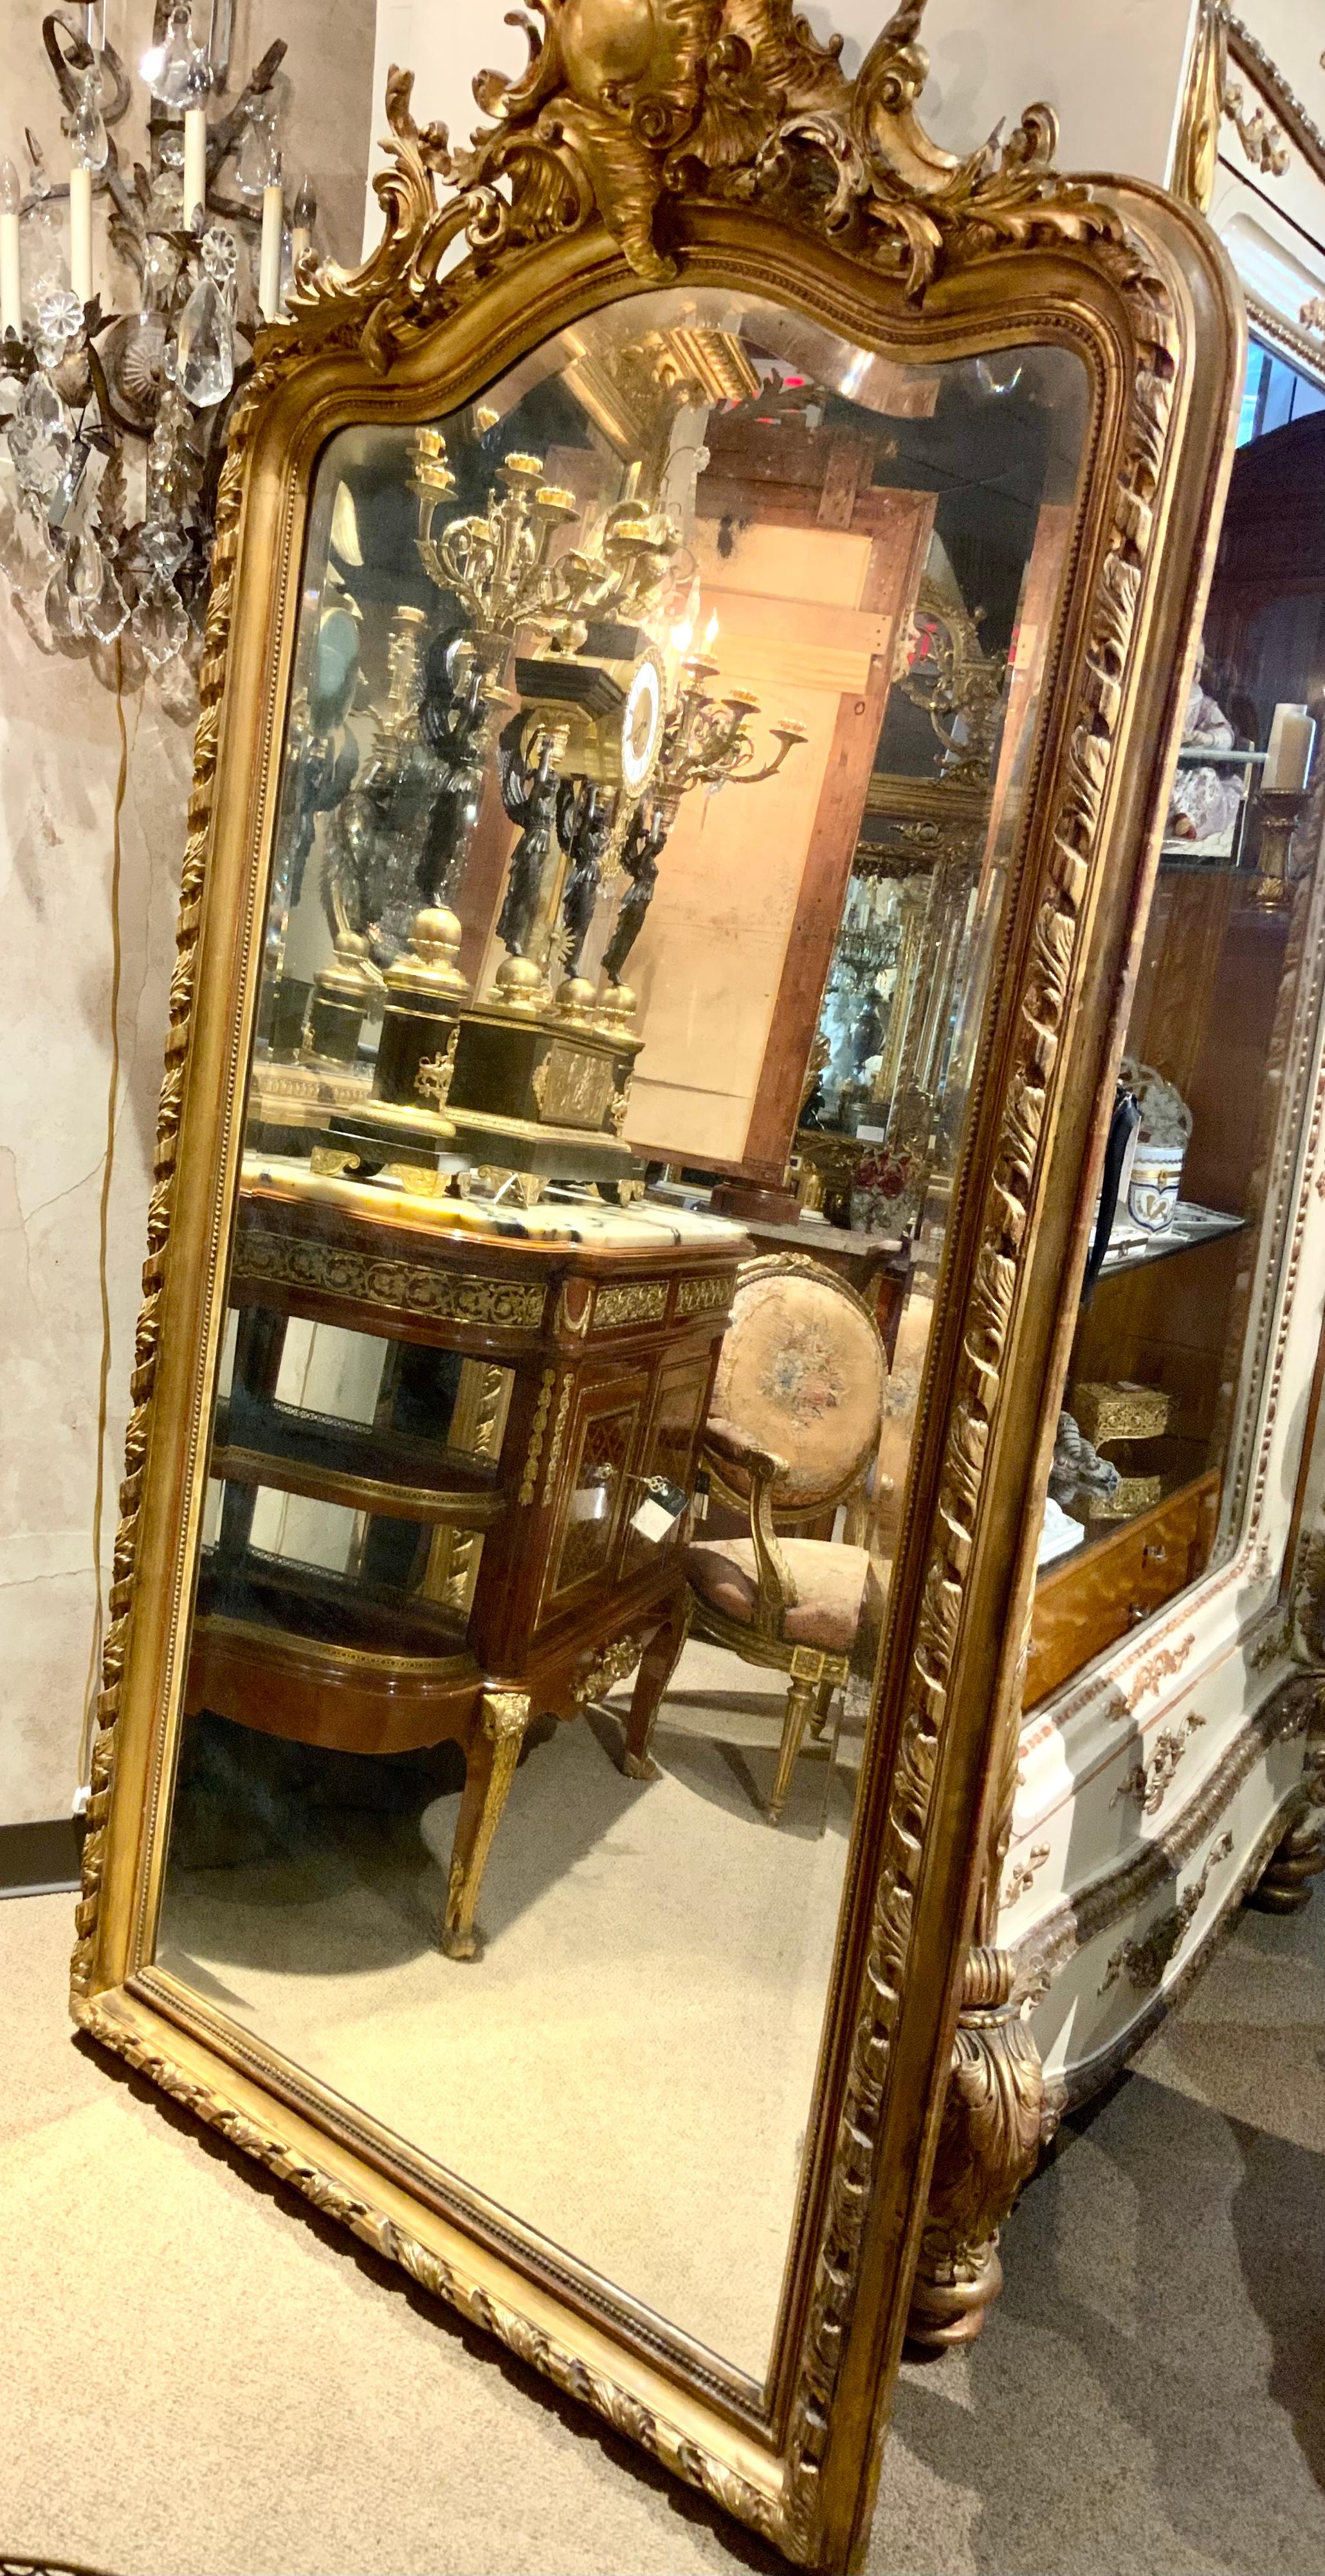 Large and majestic giltwood mirror with a wide beveled plate make this
Mirror special. It has beautiful and original gilding with a deep carved
Cartouche centered at the top. Carved swirl designs across the top
Edge add to the overall attraction